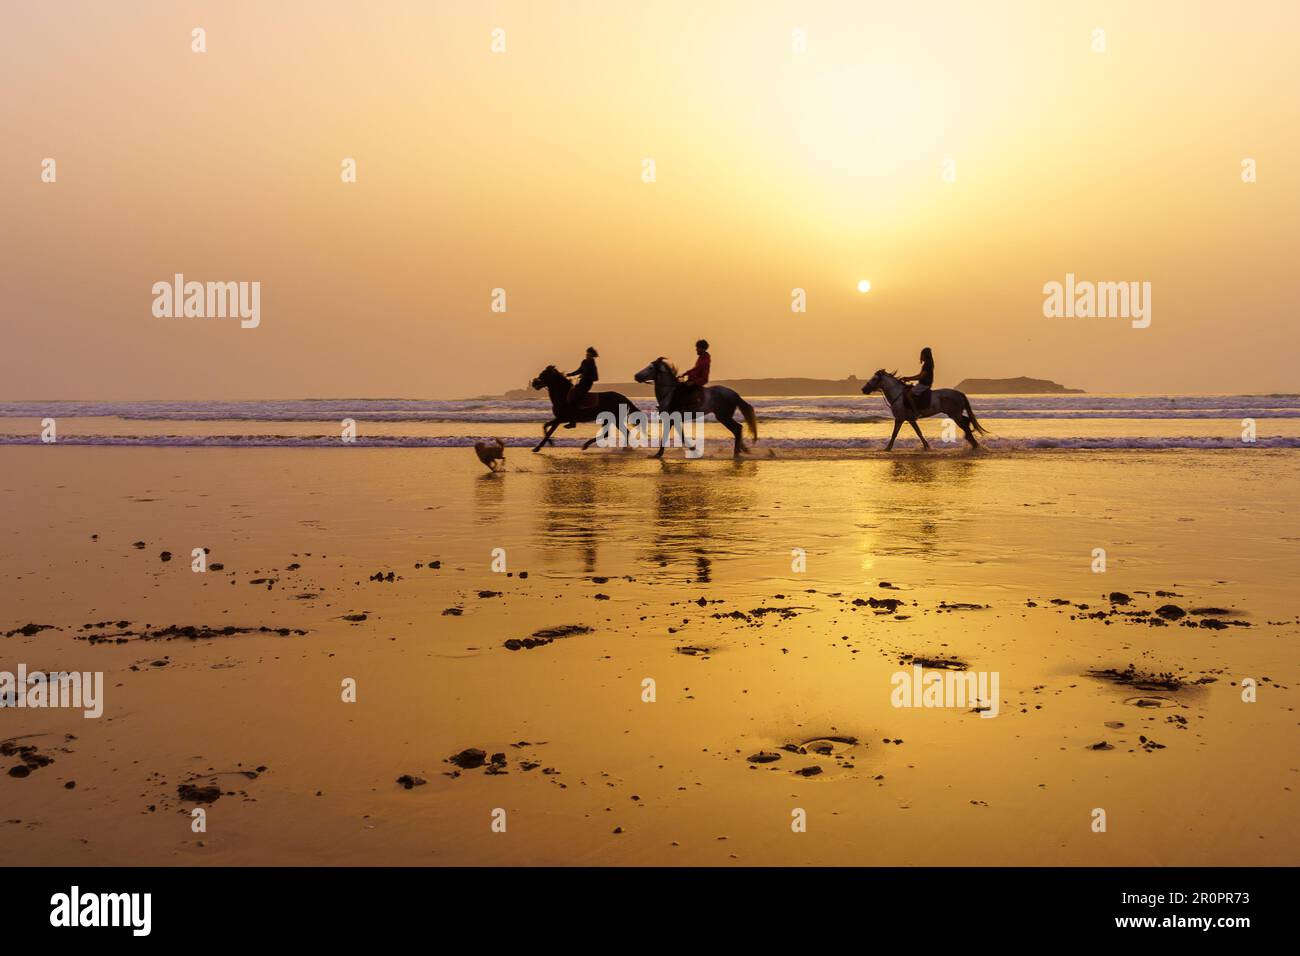 Essaouira, Morocco - April 07, 2023: Sunset view with silhouette of horses and riders on the beach of Essaouira (Mogador), Morocco Stock Photo